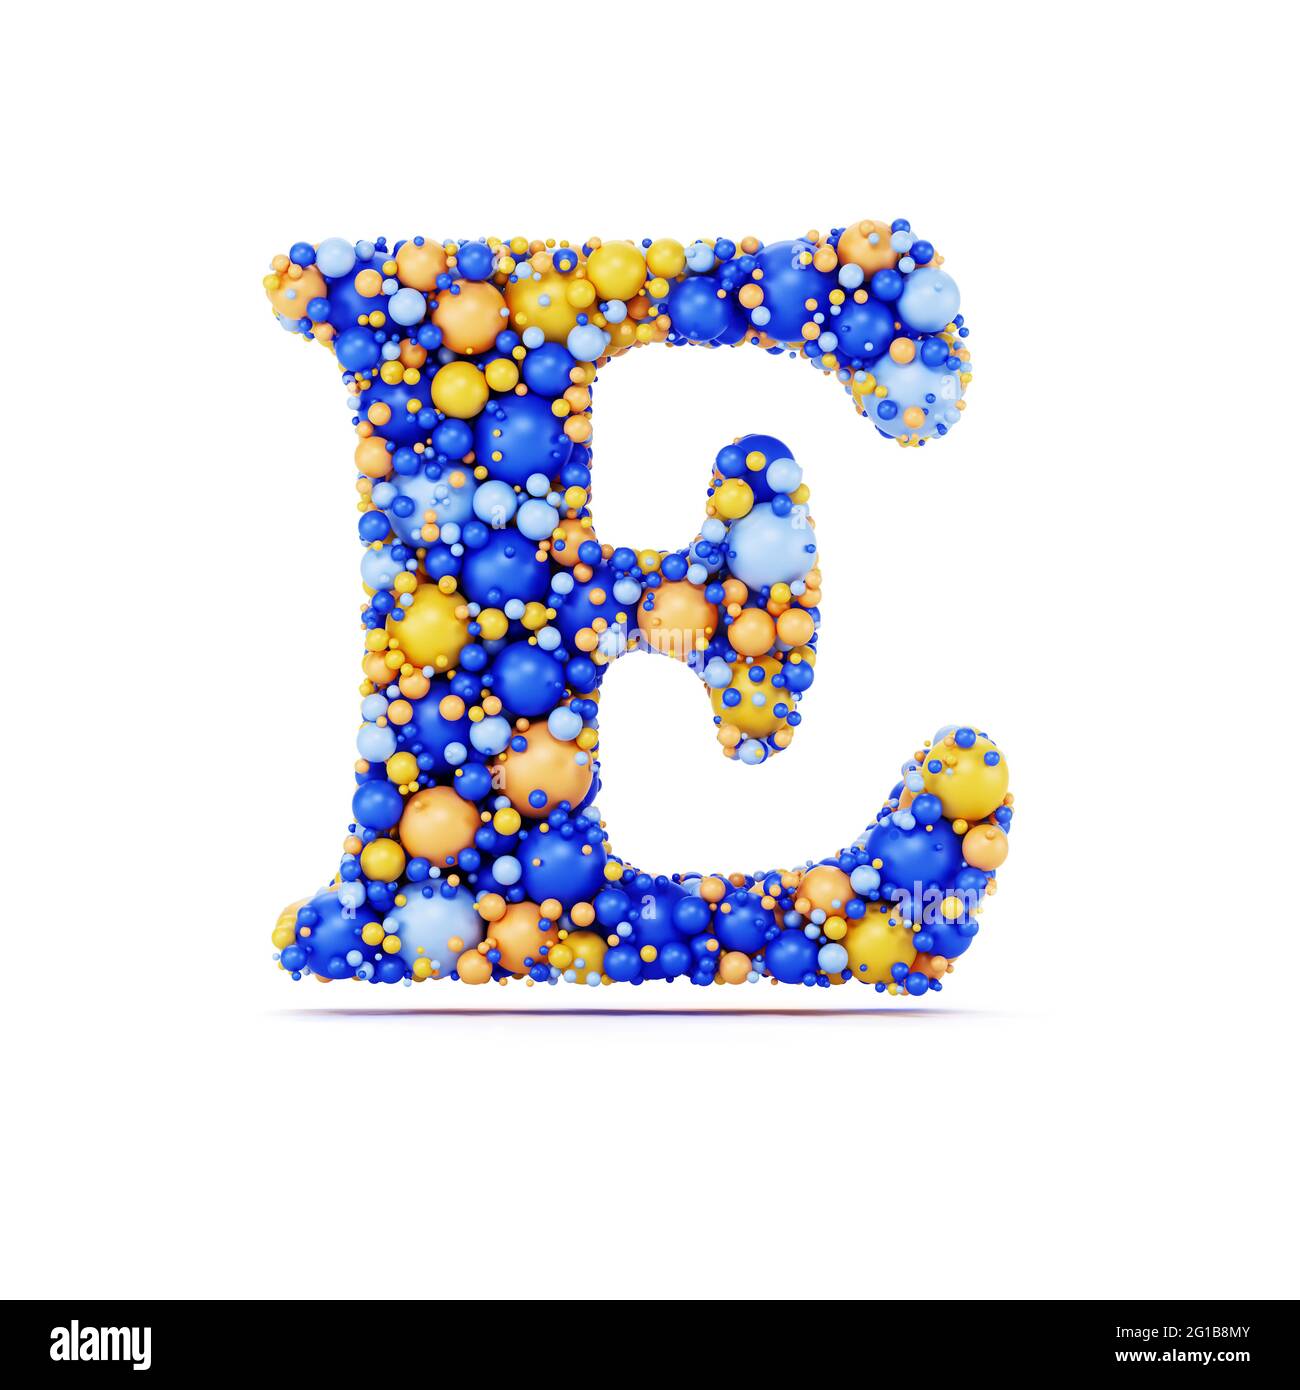 E letter with colored shiny balls. Realistic 3d rendering illustration. Isolated on white background with shadow cast Stock Photo